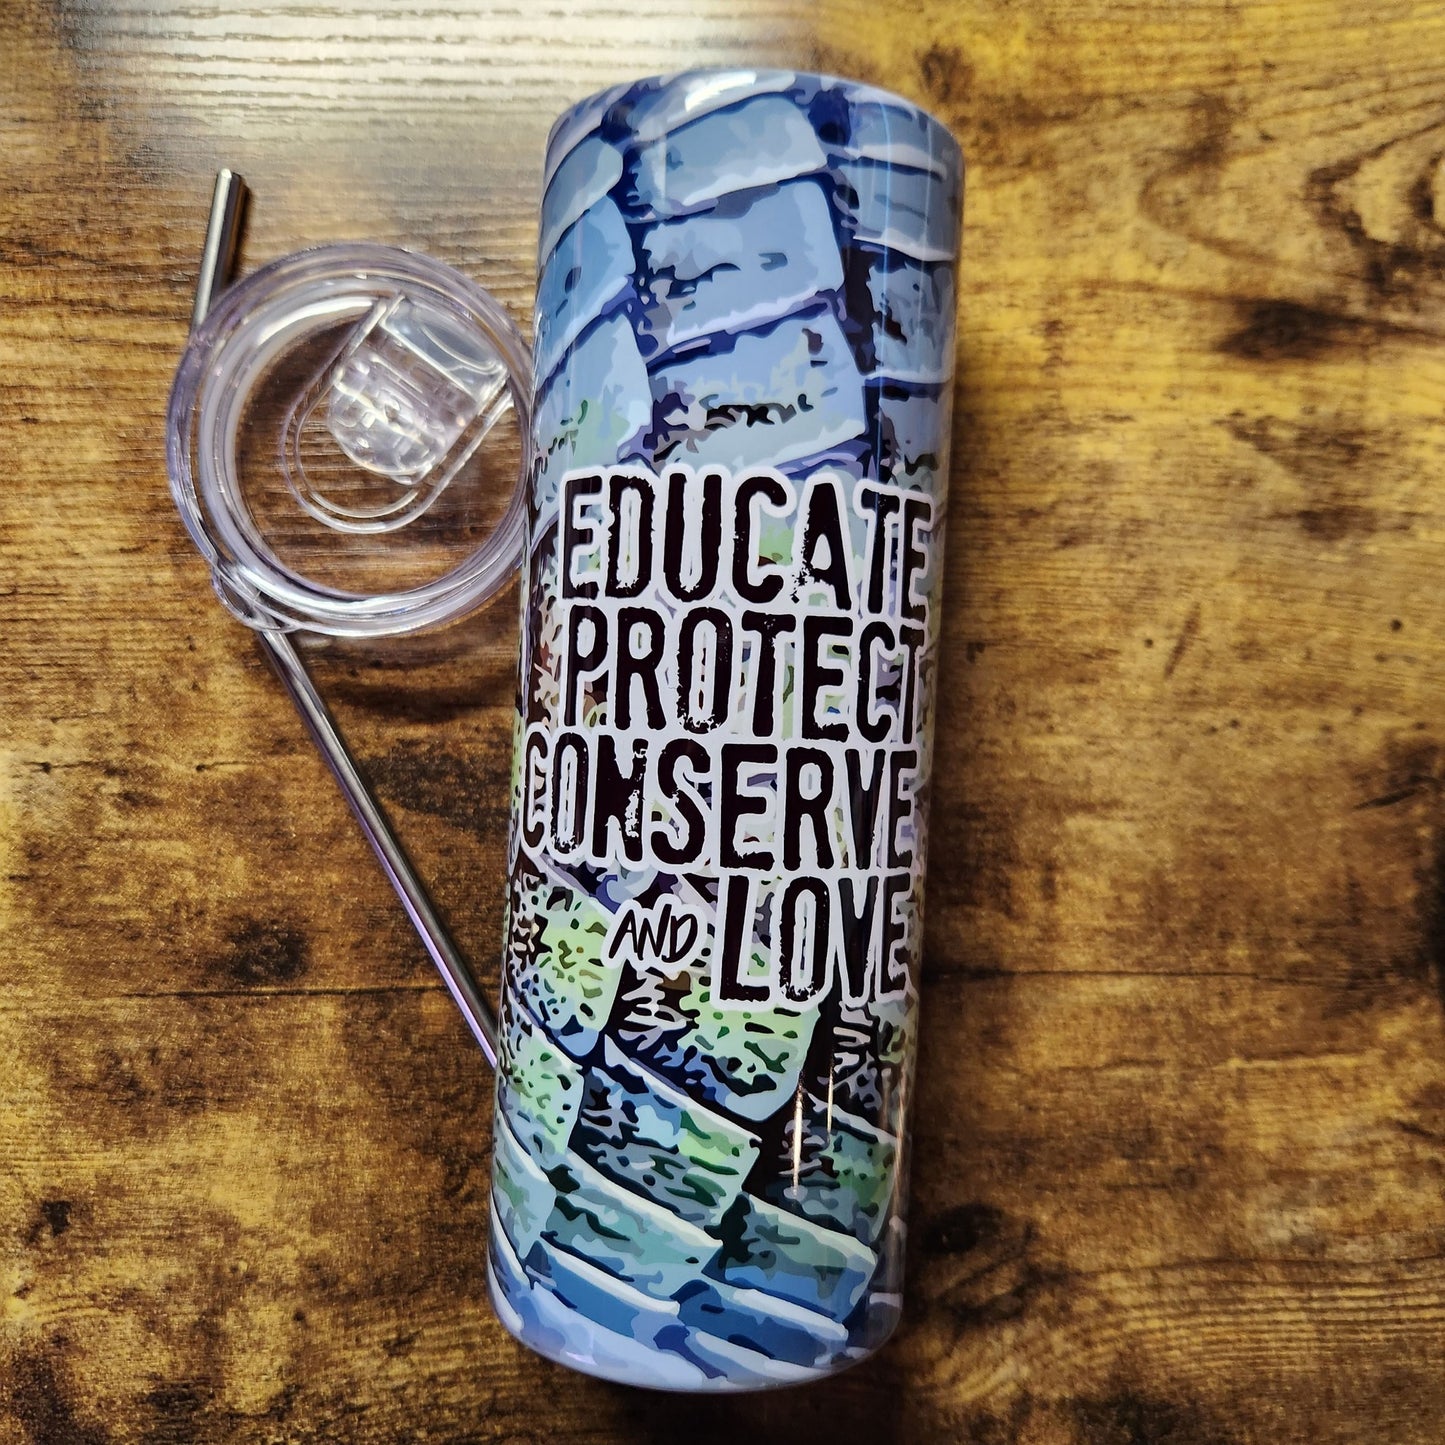 Mexican Alligator Lizard Scales - Educate Protect Conserve and Love - 20oz Tumbler (Made to Order)